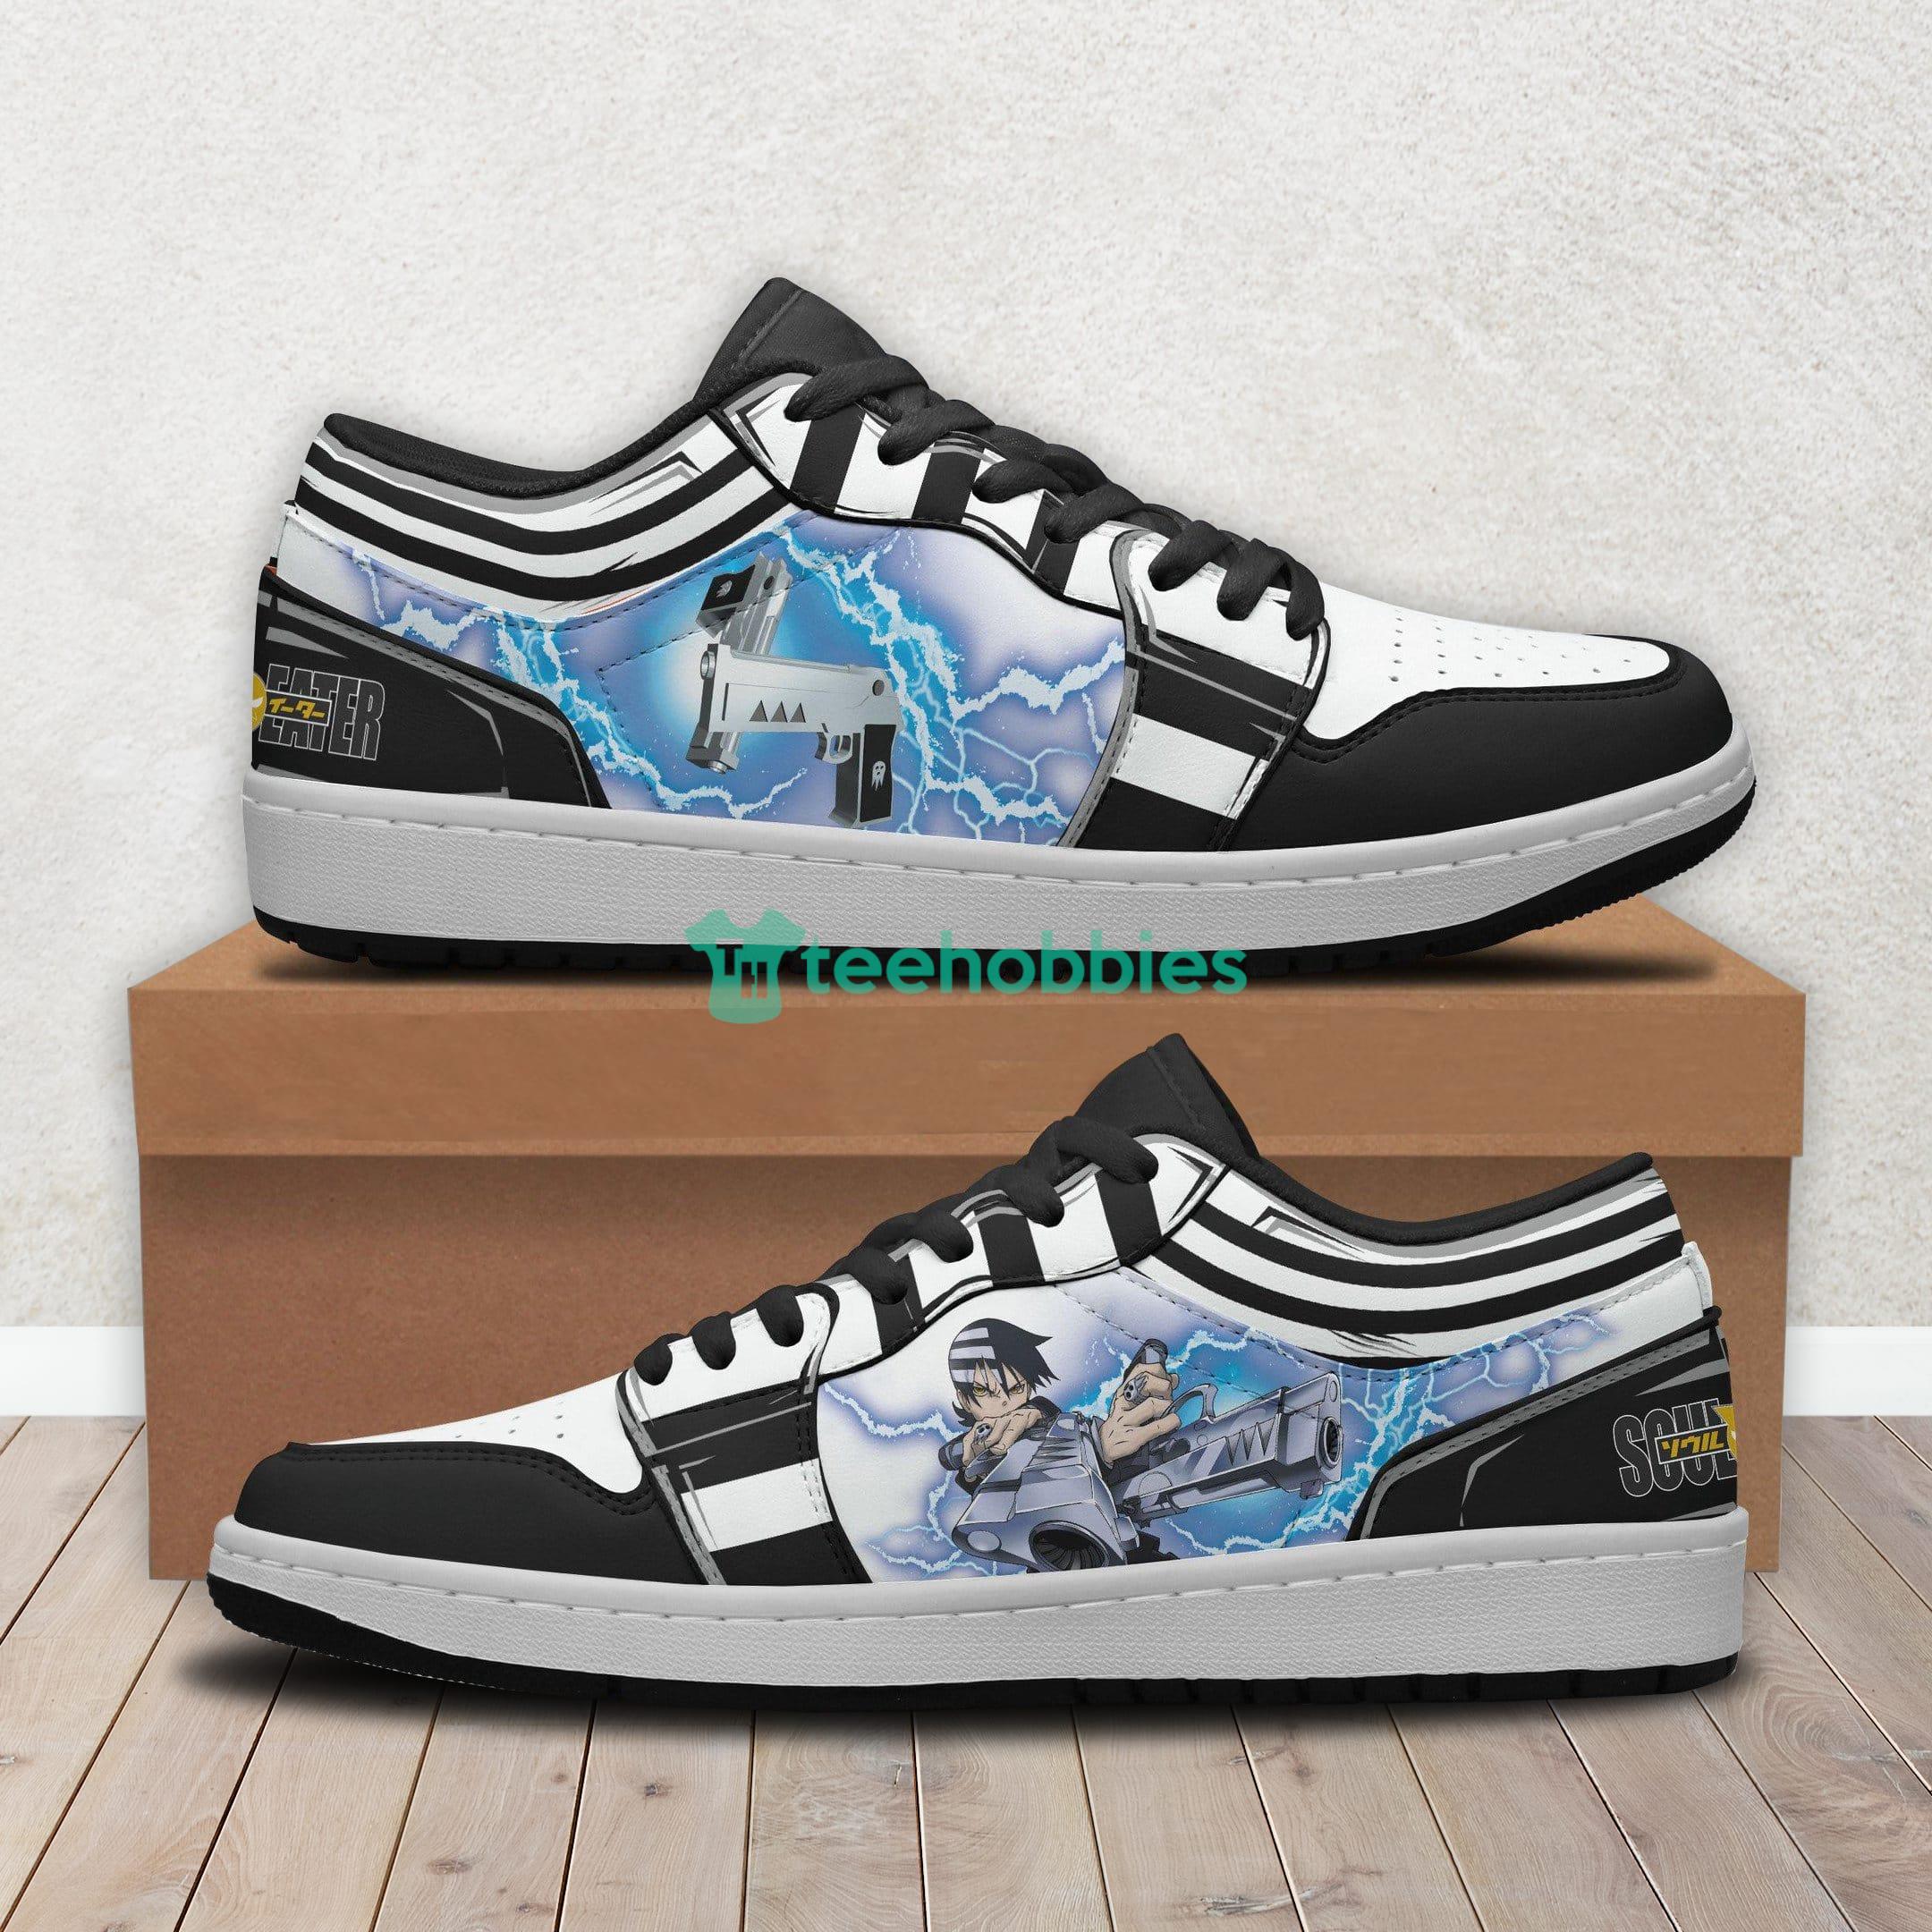 Death the Kid Soul Eater Custom Anime Air Jordan Low Top Shoesproduct photo 1